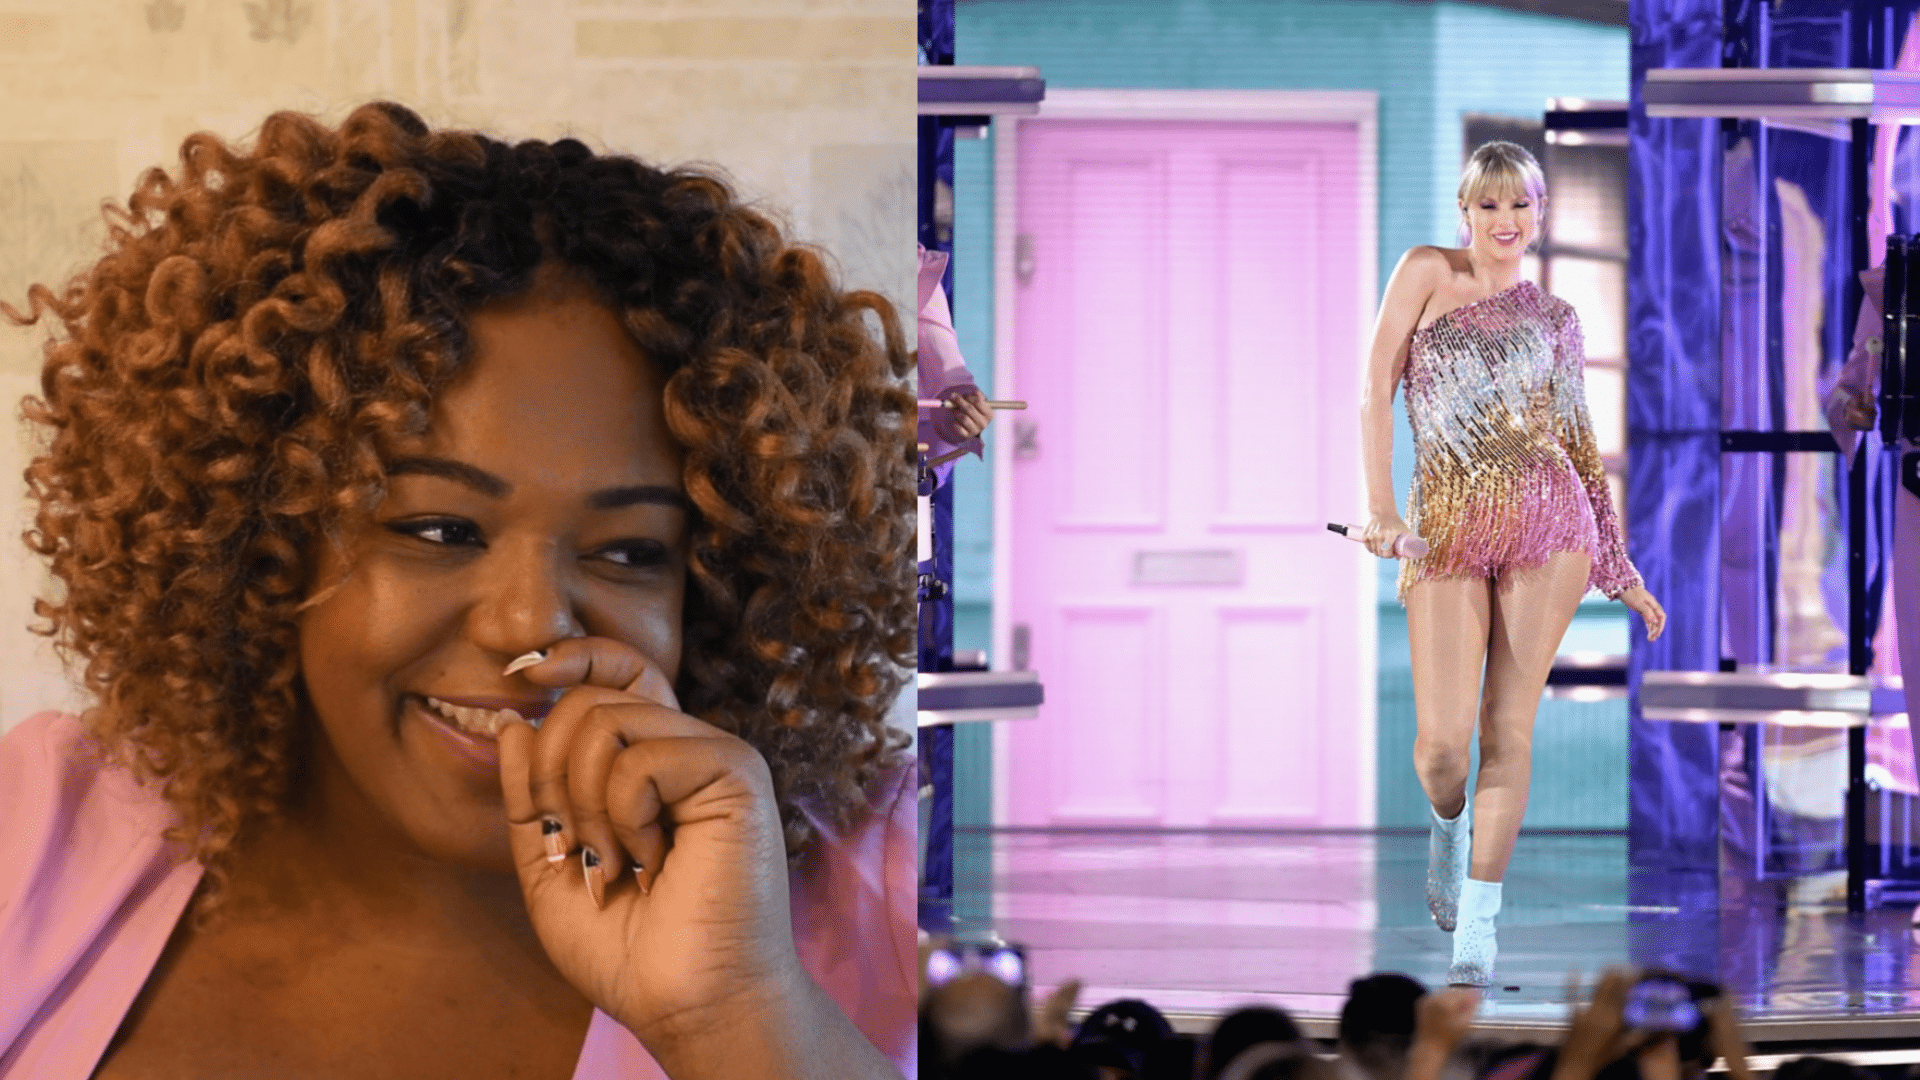 Watch 'The OverExplainer' React To Taylor Swift's Beyoncé-Inspired Performance